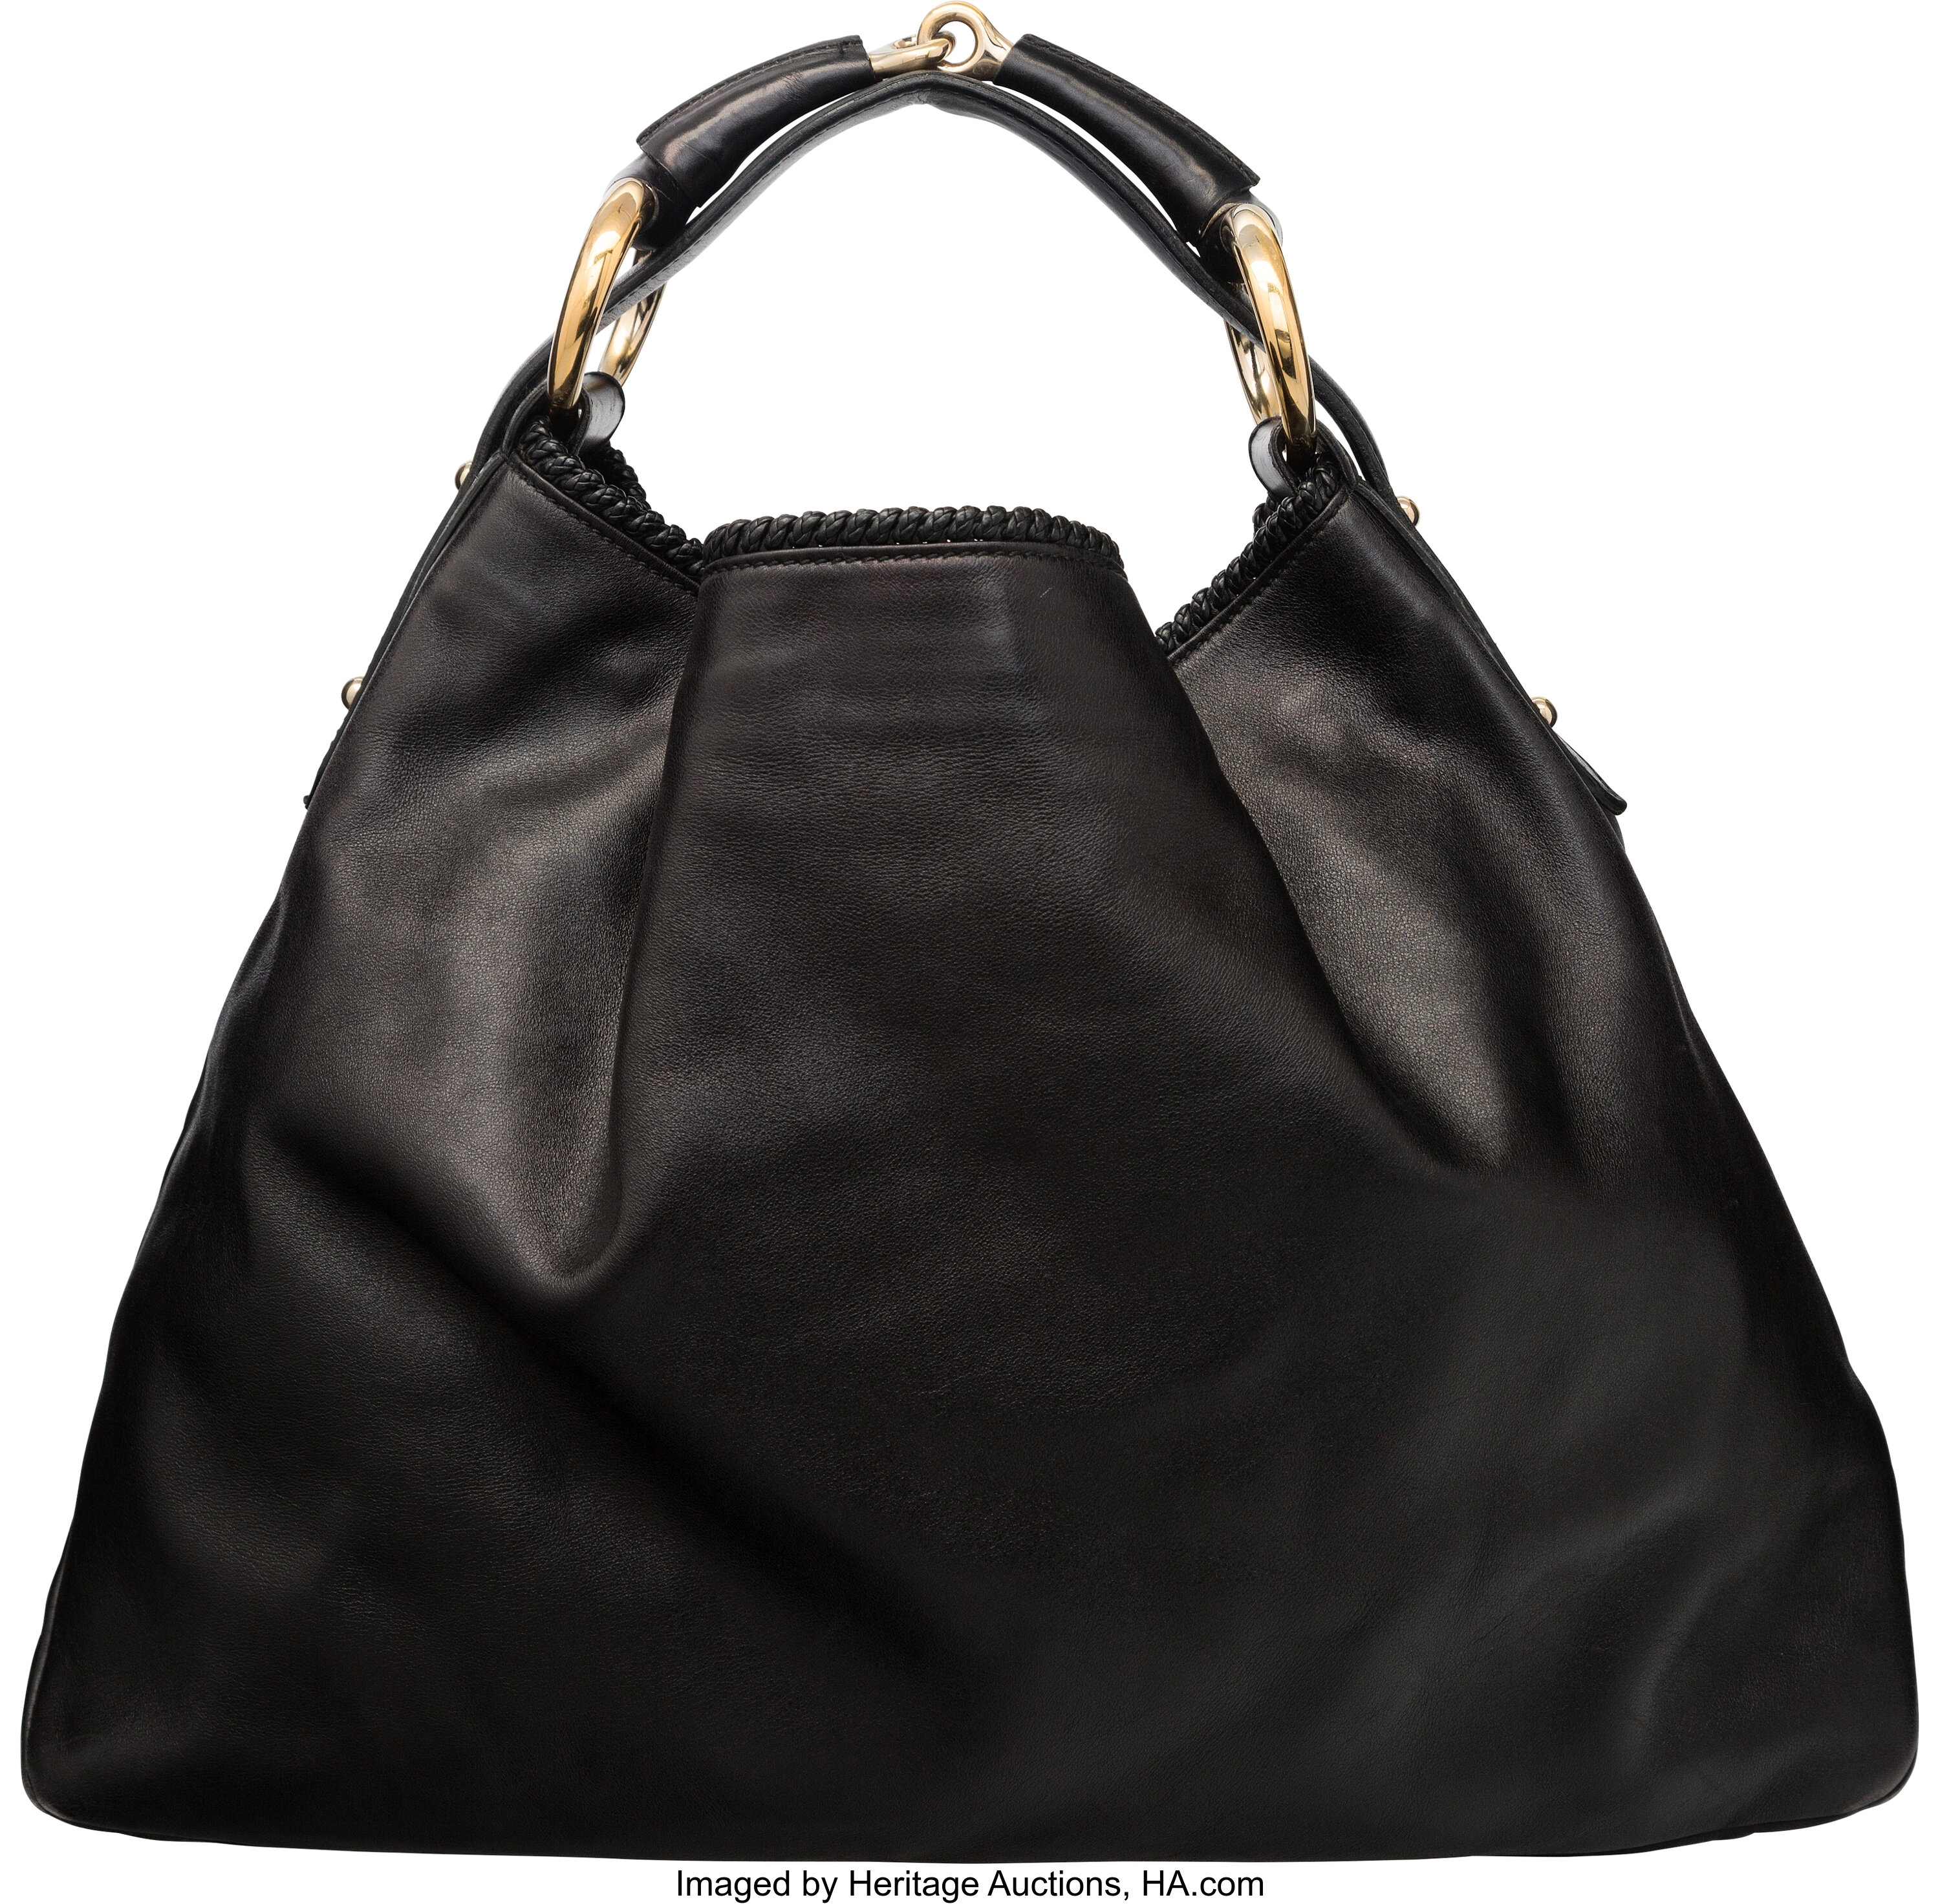 Gucci Black Horsebit Hobo Bag with Silver Hardware. | #58324 | Heritage Auctions